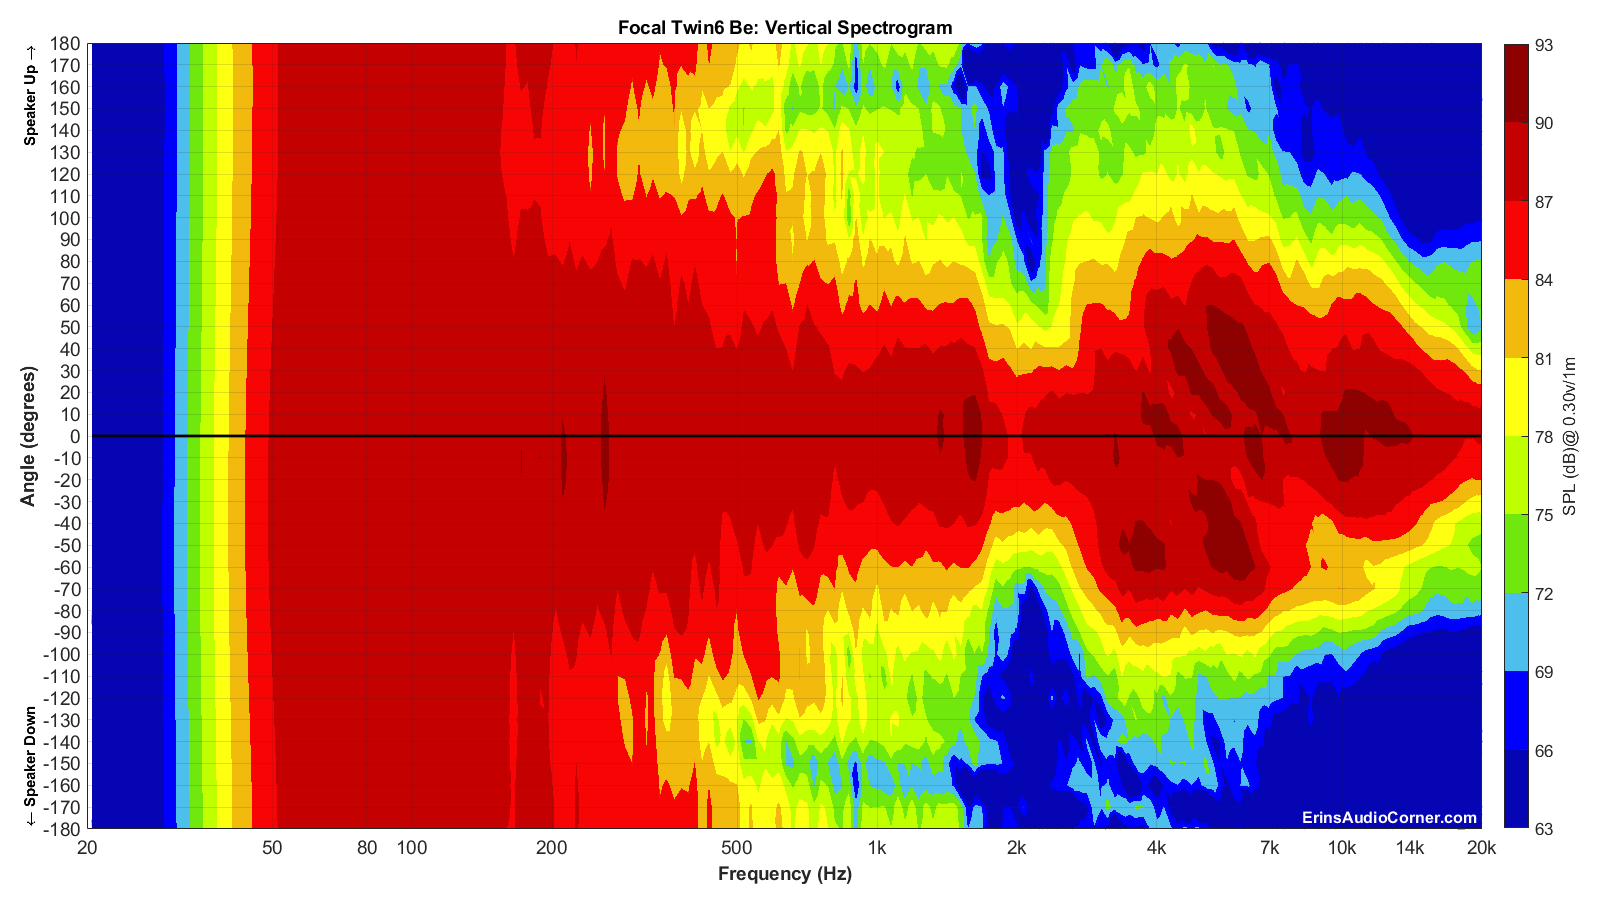 Focal%20Twin6%20Be_Vertical_Spectrogram_Full.png